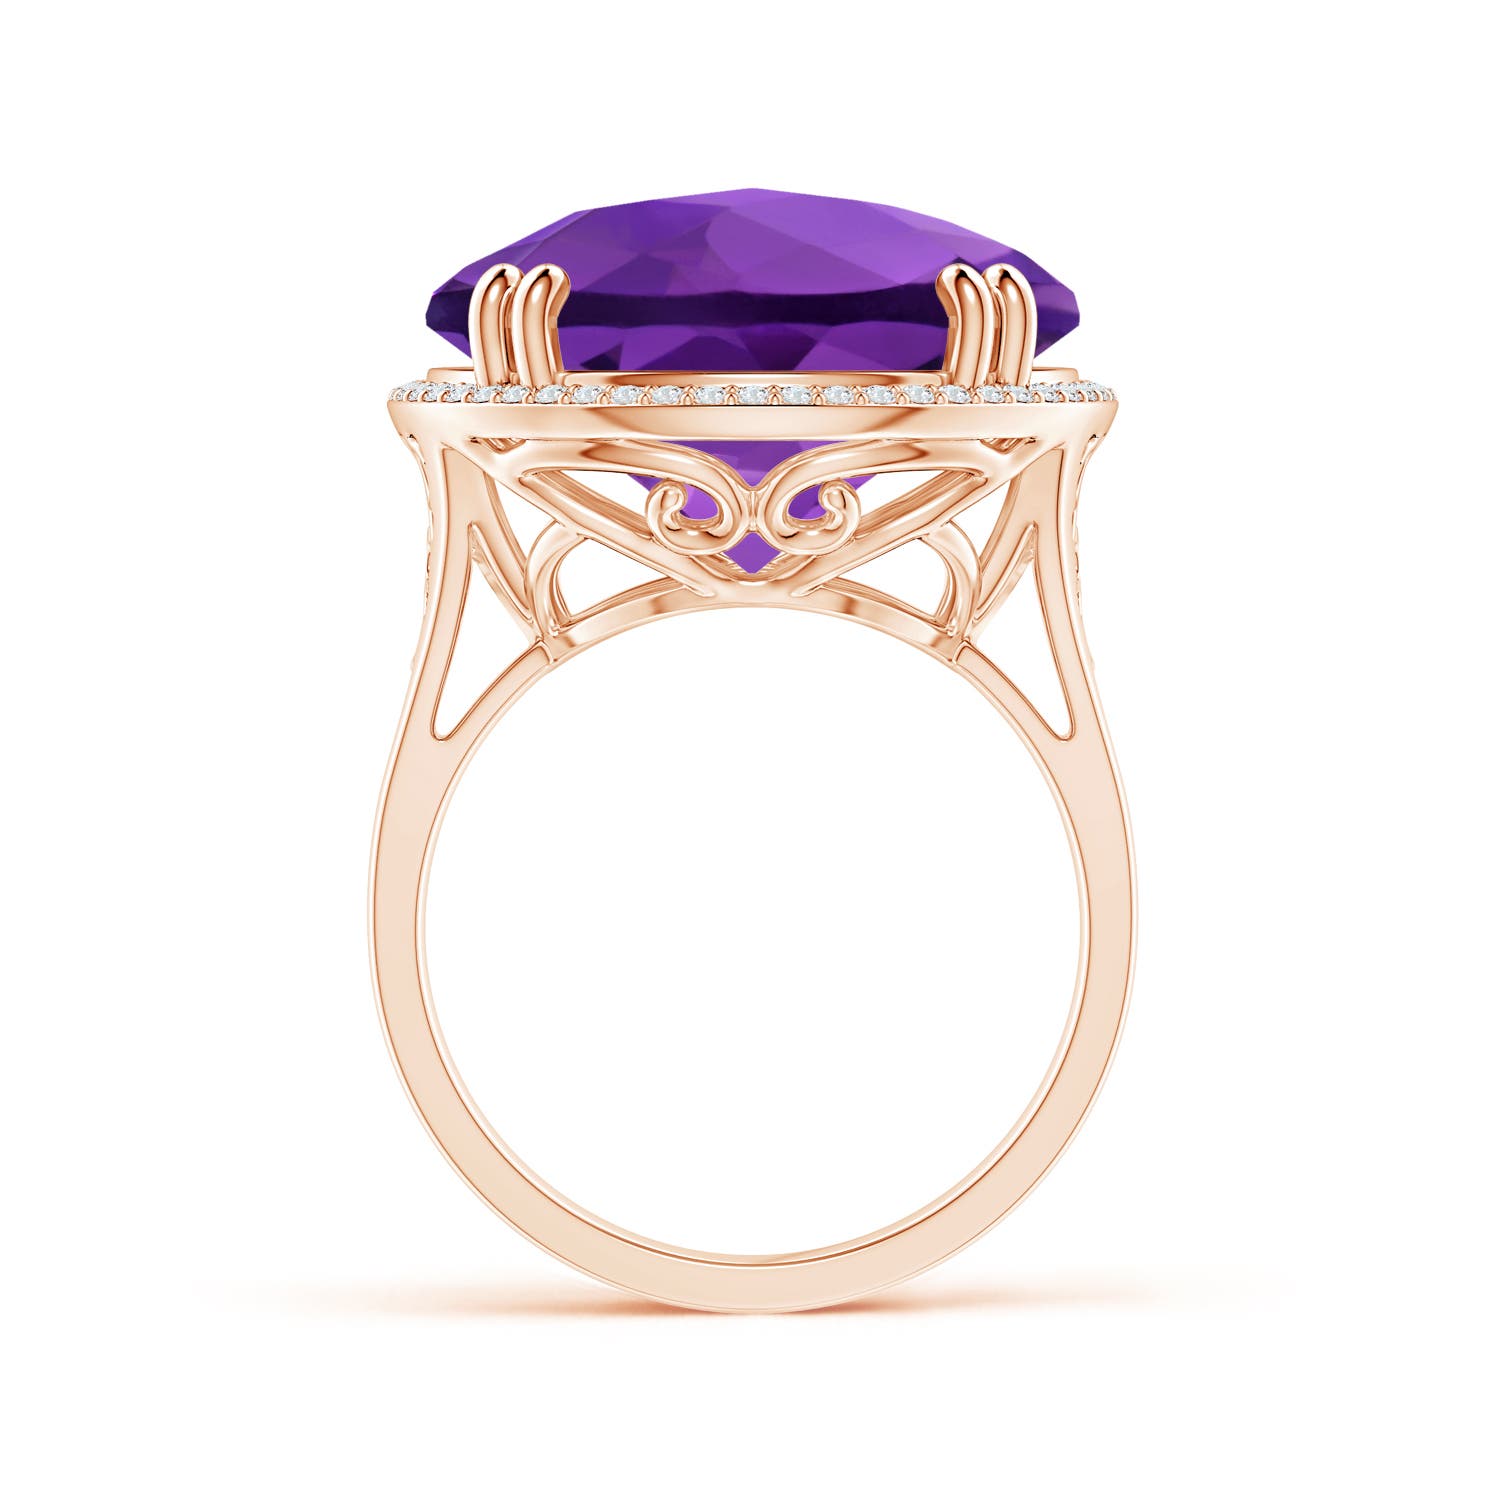 AAA - Amethyst / 18.23 CT / 14 KT Rose Gold